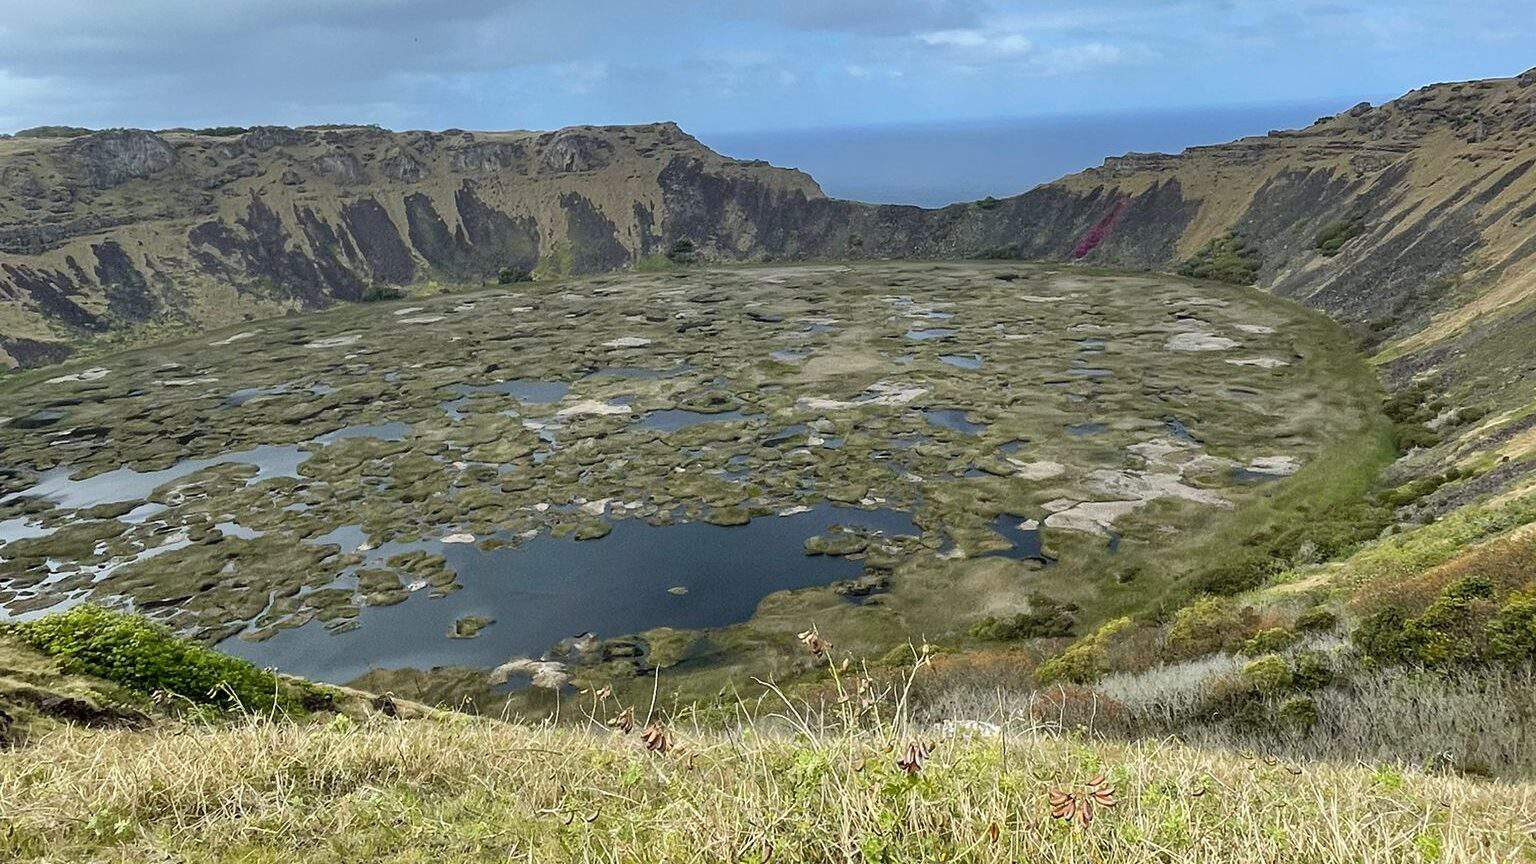 The crater of Rano Kau volcano on the southern tip of Easter Island